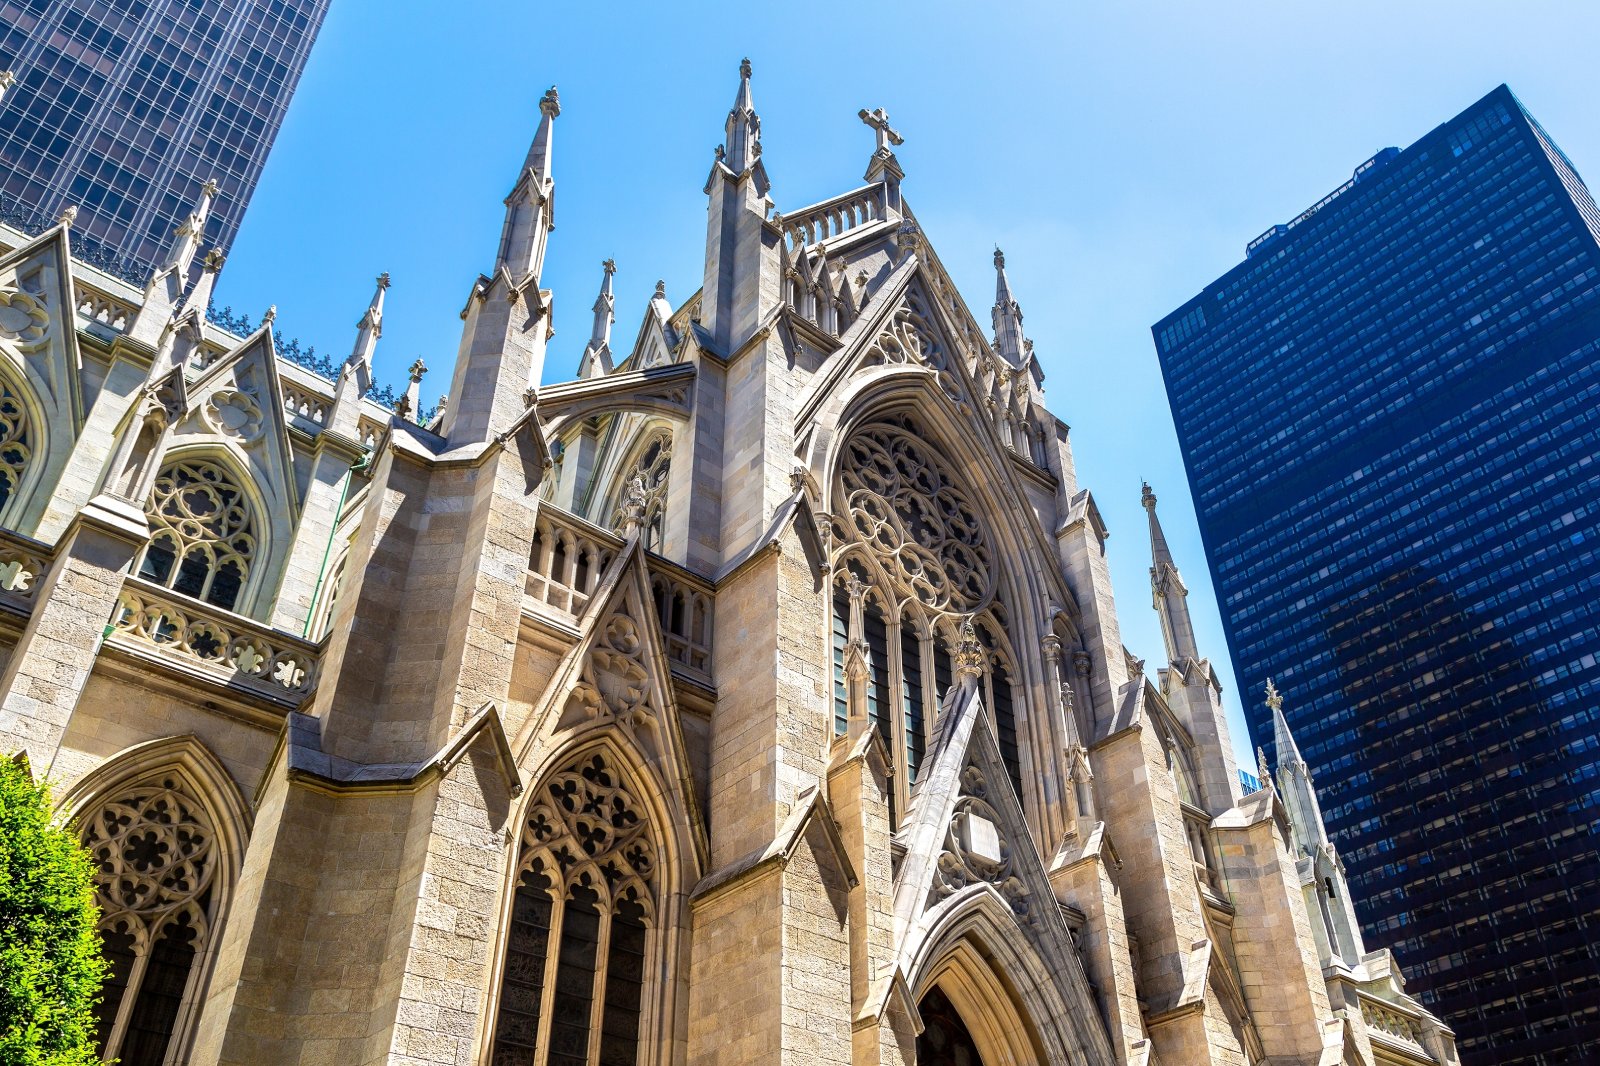 Image Credit: Shutterstock / Sergii Figurnyi <p><span>An iconic symbol of faith amidst the hustle and bustle of New York City, this neo-Gothic cathedral invites visitors to pause, reflect, and find solace.</span></p>